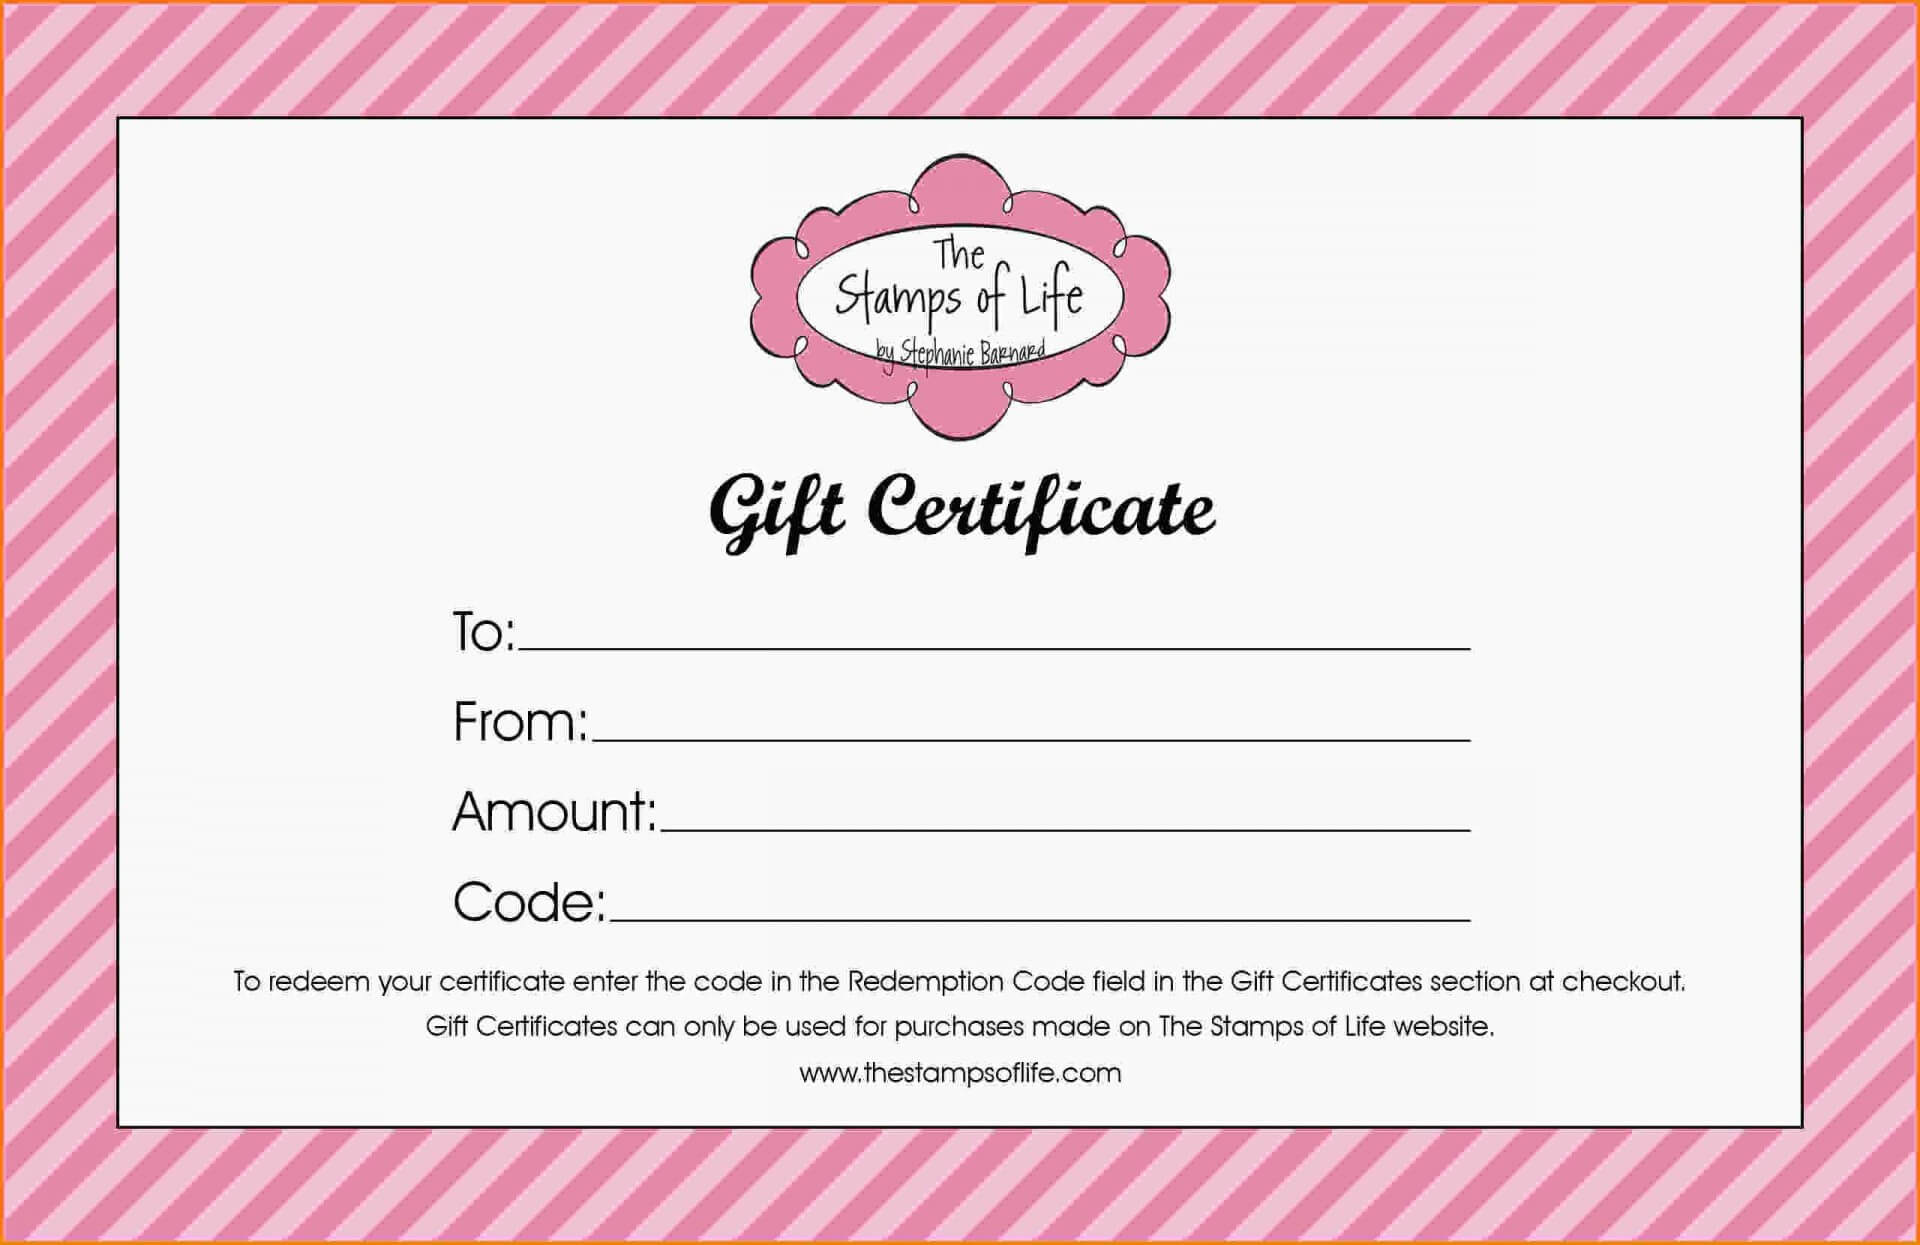 011 Free Certificates Printing For Nail Salon Gift Samples With Nail Gift Certificate Template Free